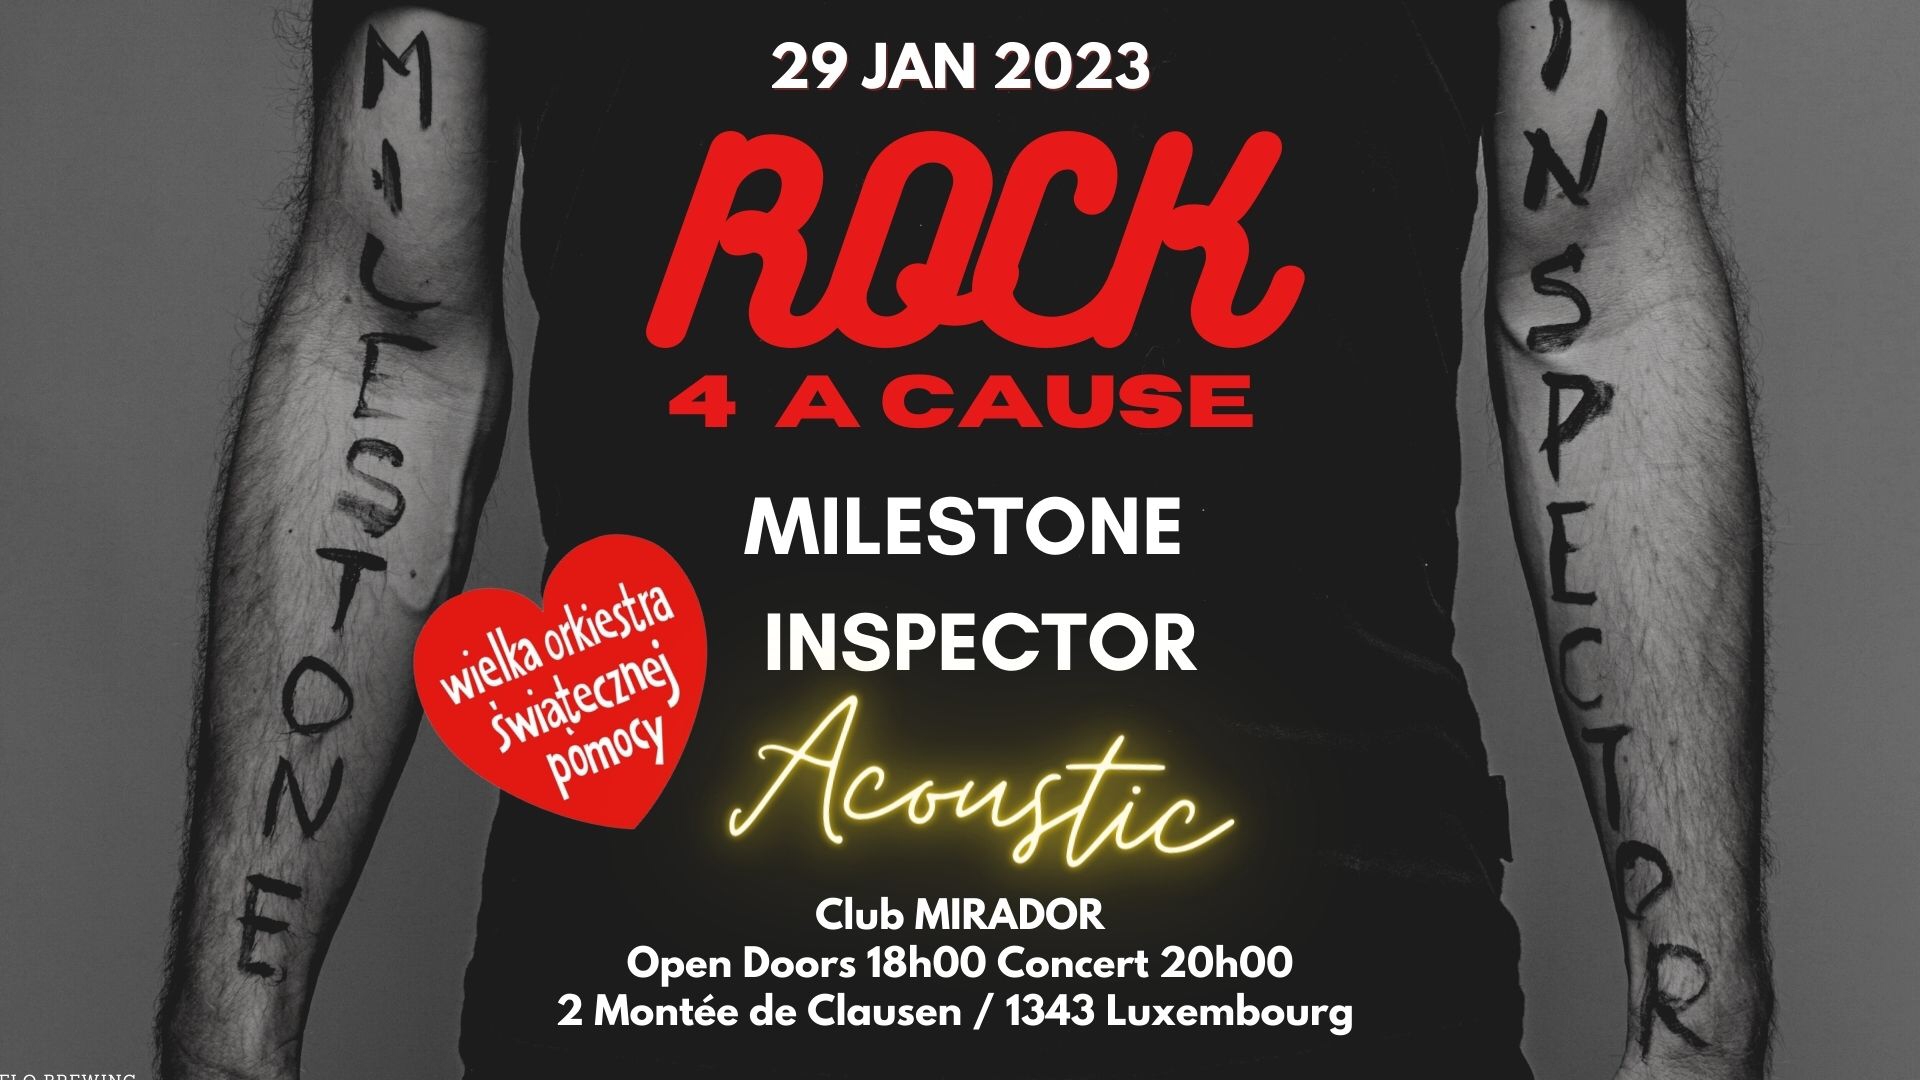 ROCK 4 A CAUSE - MILESTONE INSPECTOR FOR WOSP CHARITY